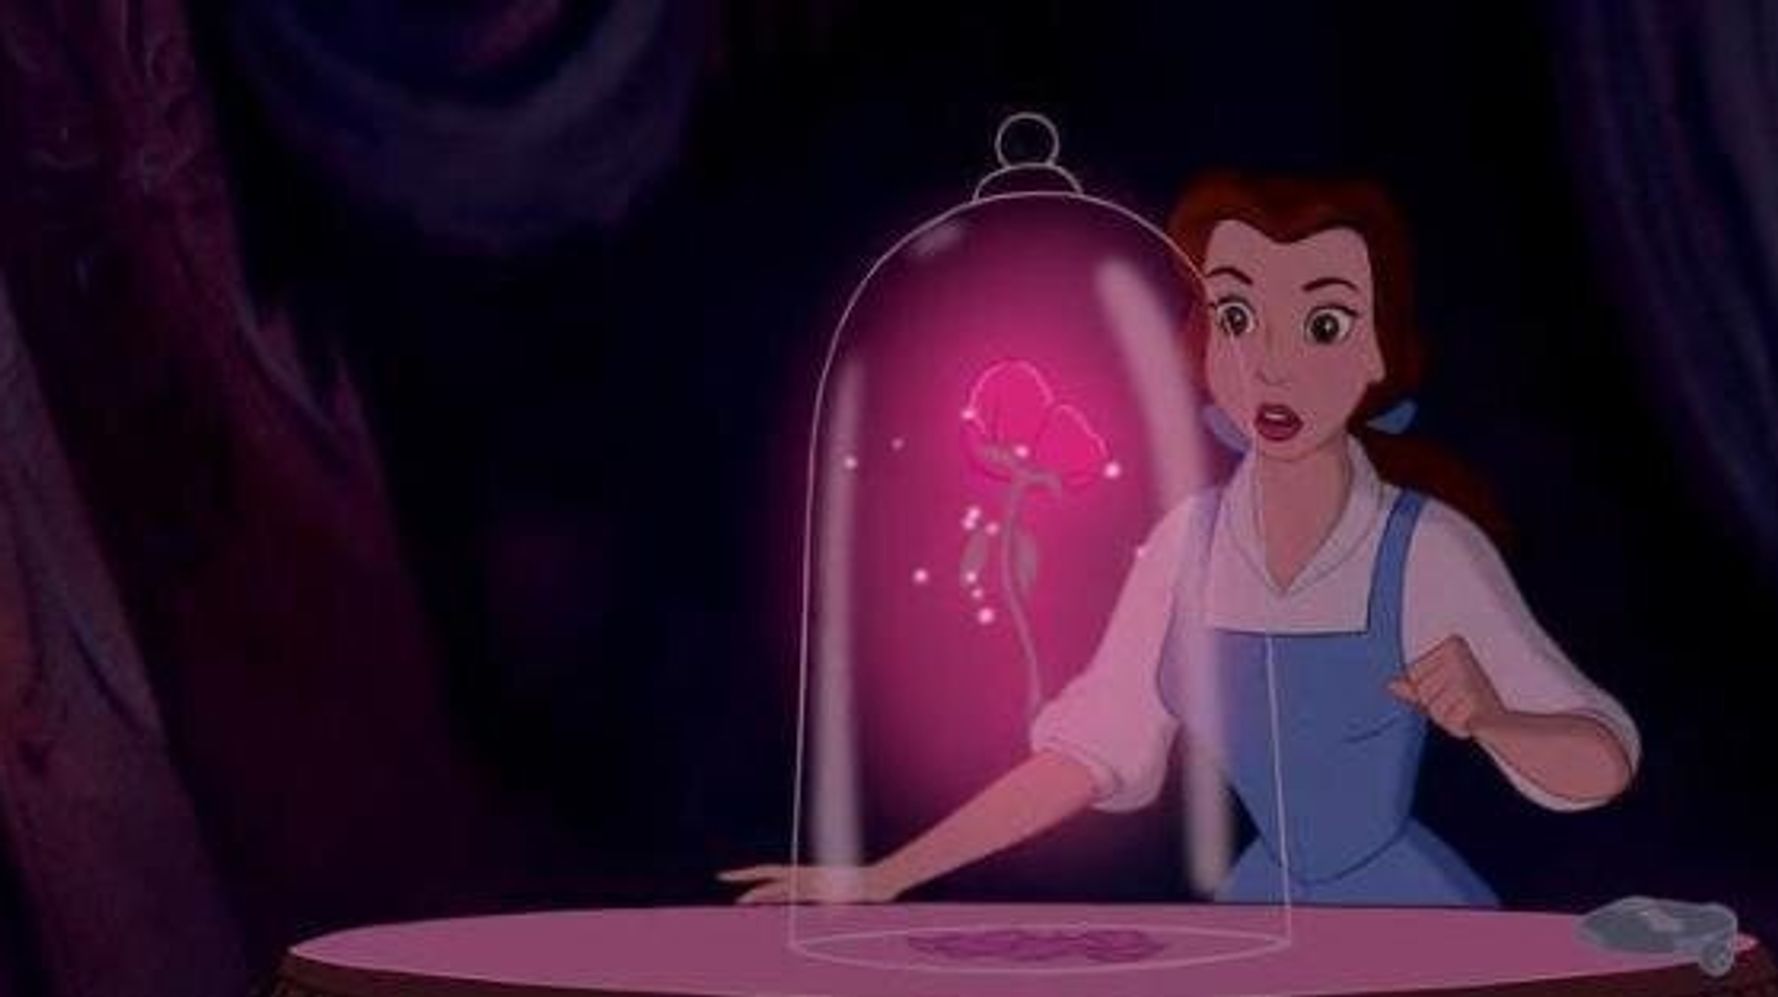 Disney S Beauty And The Beast Is Very Different From The Original Fairy Tale Huffpost Canada Parents